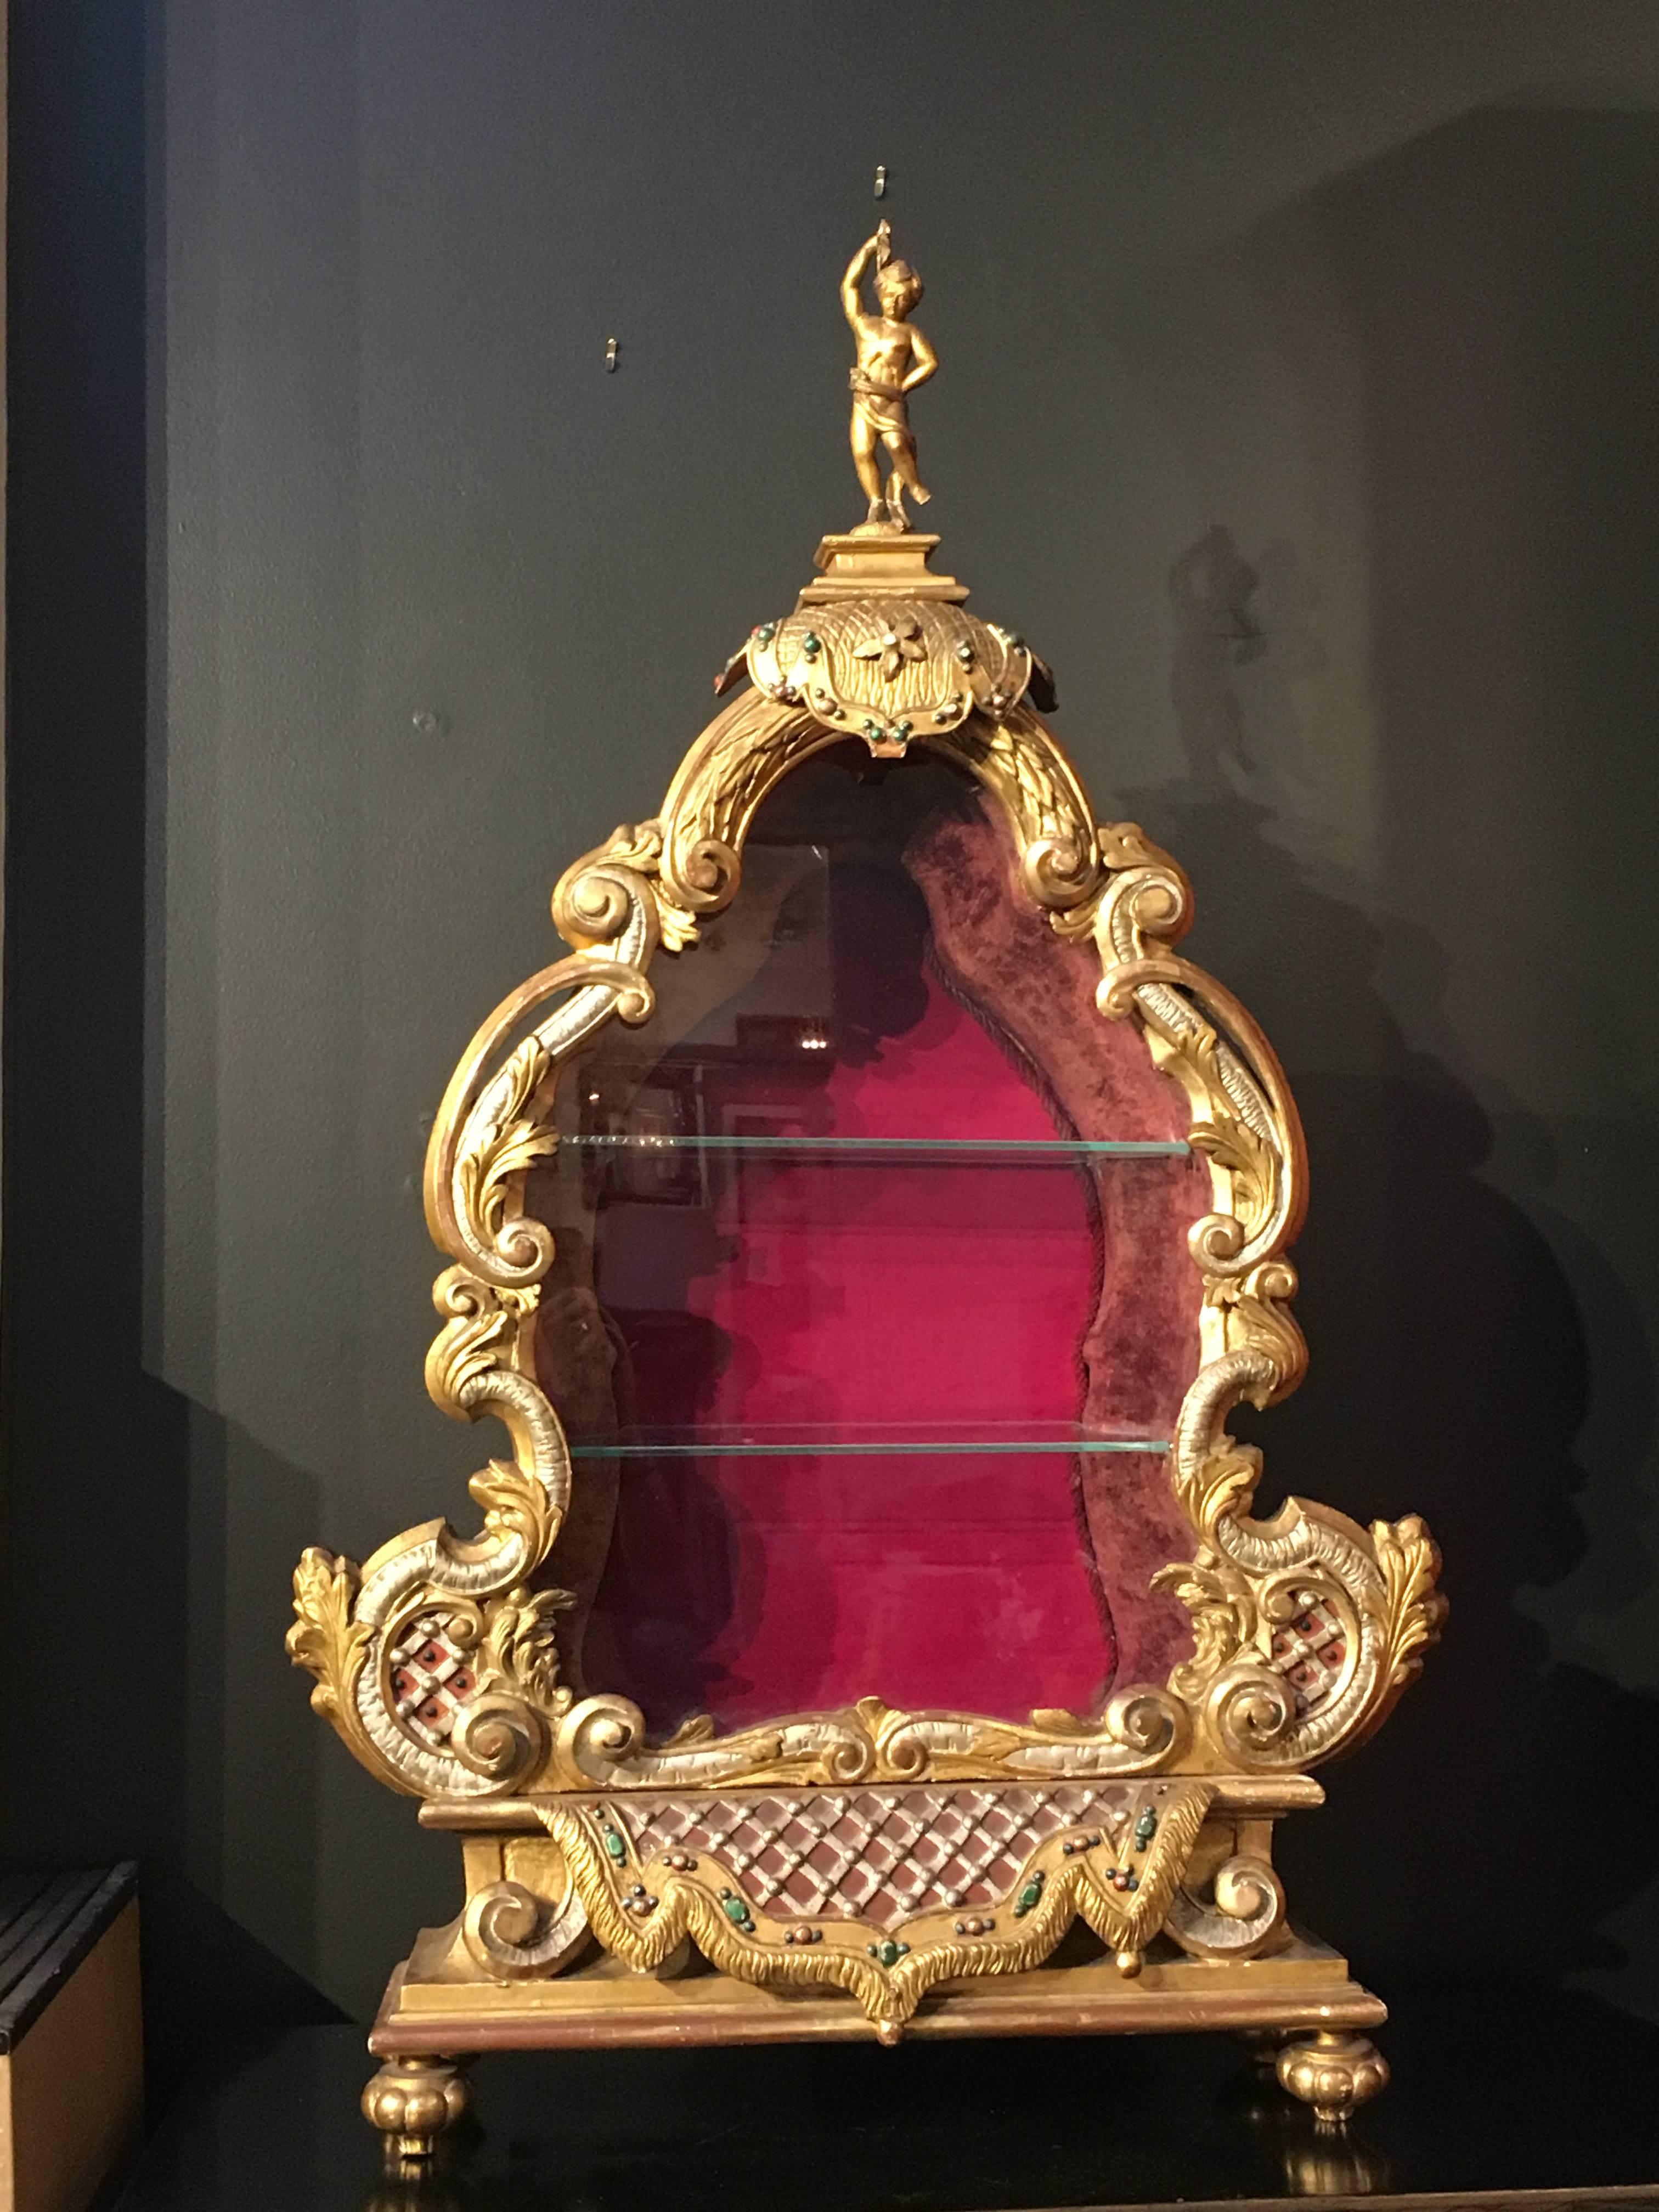 An elegant late 19th century Baroque style tabletop vitrine. The vitrine marvelously carved and richly gilt in the Baroque manner, with beautiful foliate scrollwork and polychrome detailing reminiscent of grotto architecture, all topped by a